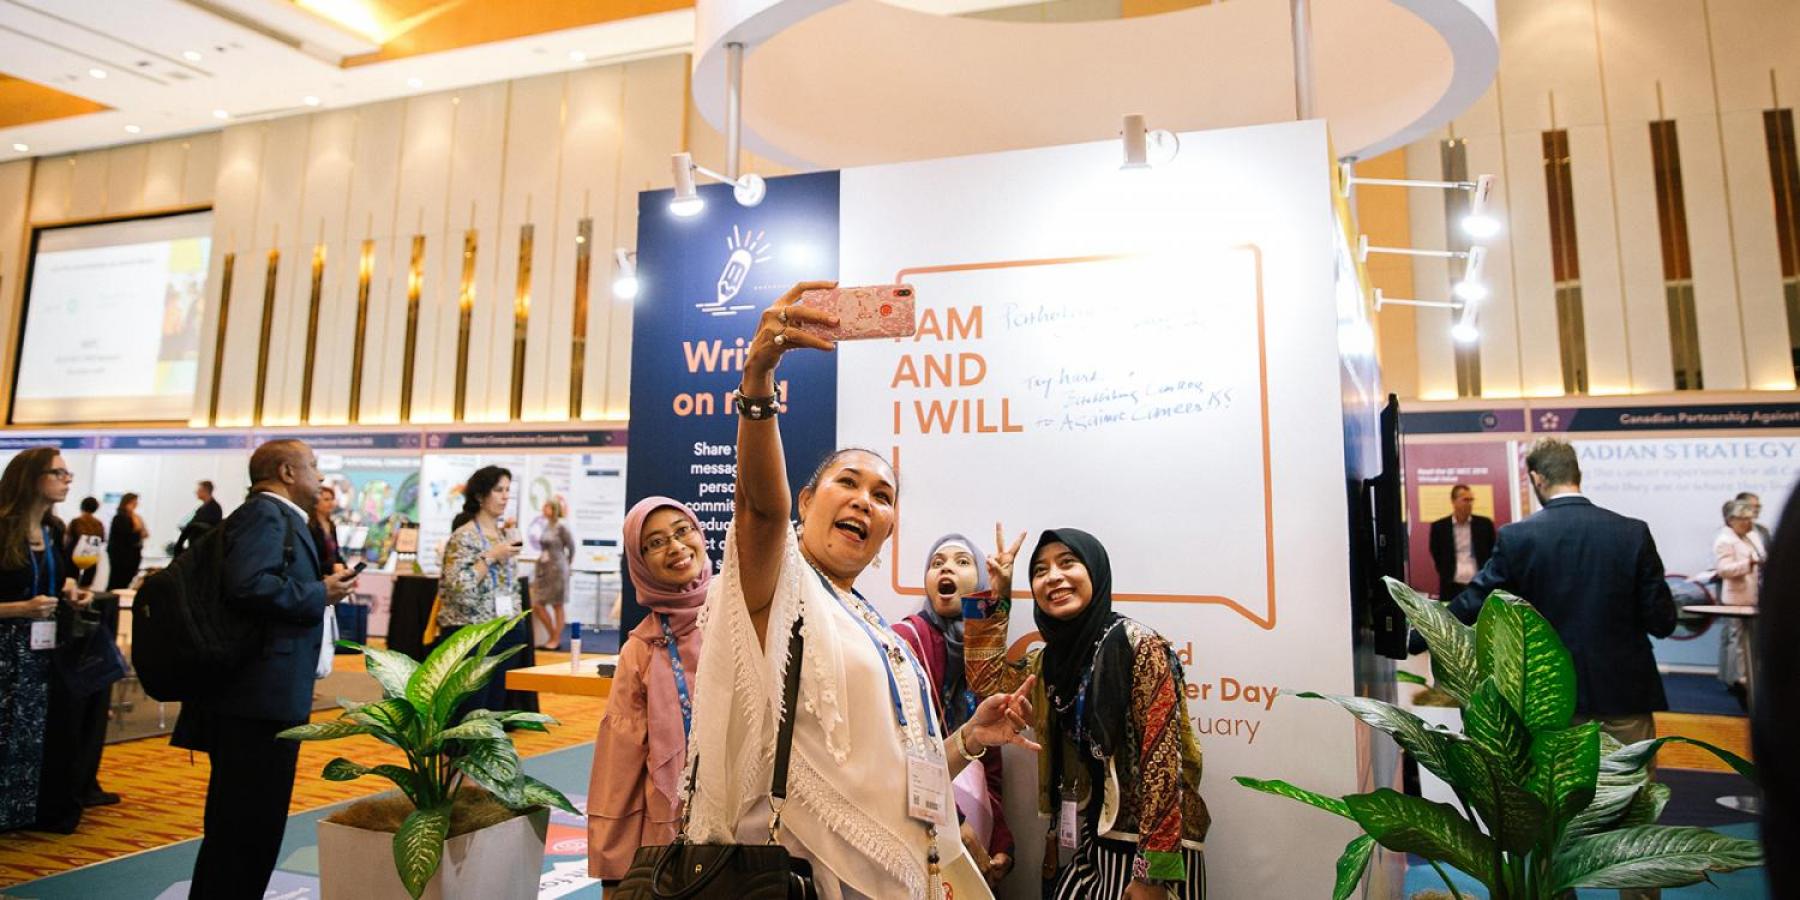 World Cancer Day 2019-2021 campaign 'I Am And I Will' launched at the 2018 World Cancer Congress in Kuala Lumpur, Malaysia © Union for International Cancer Control